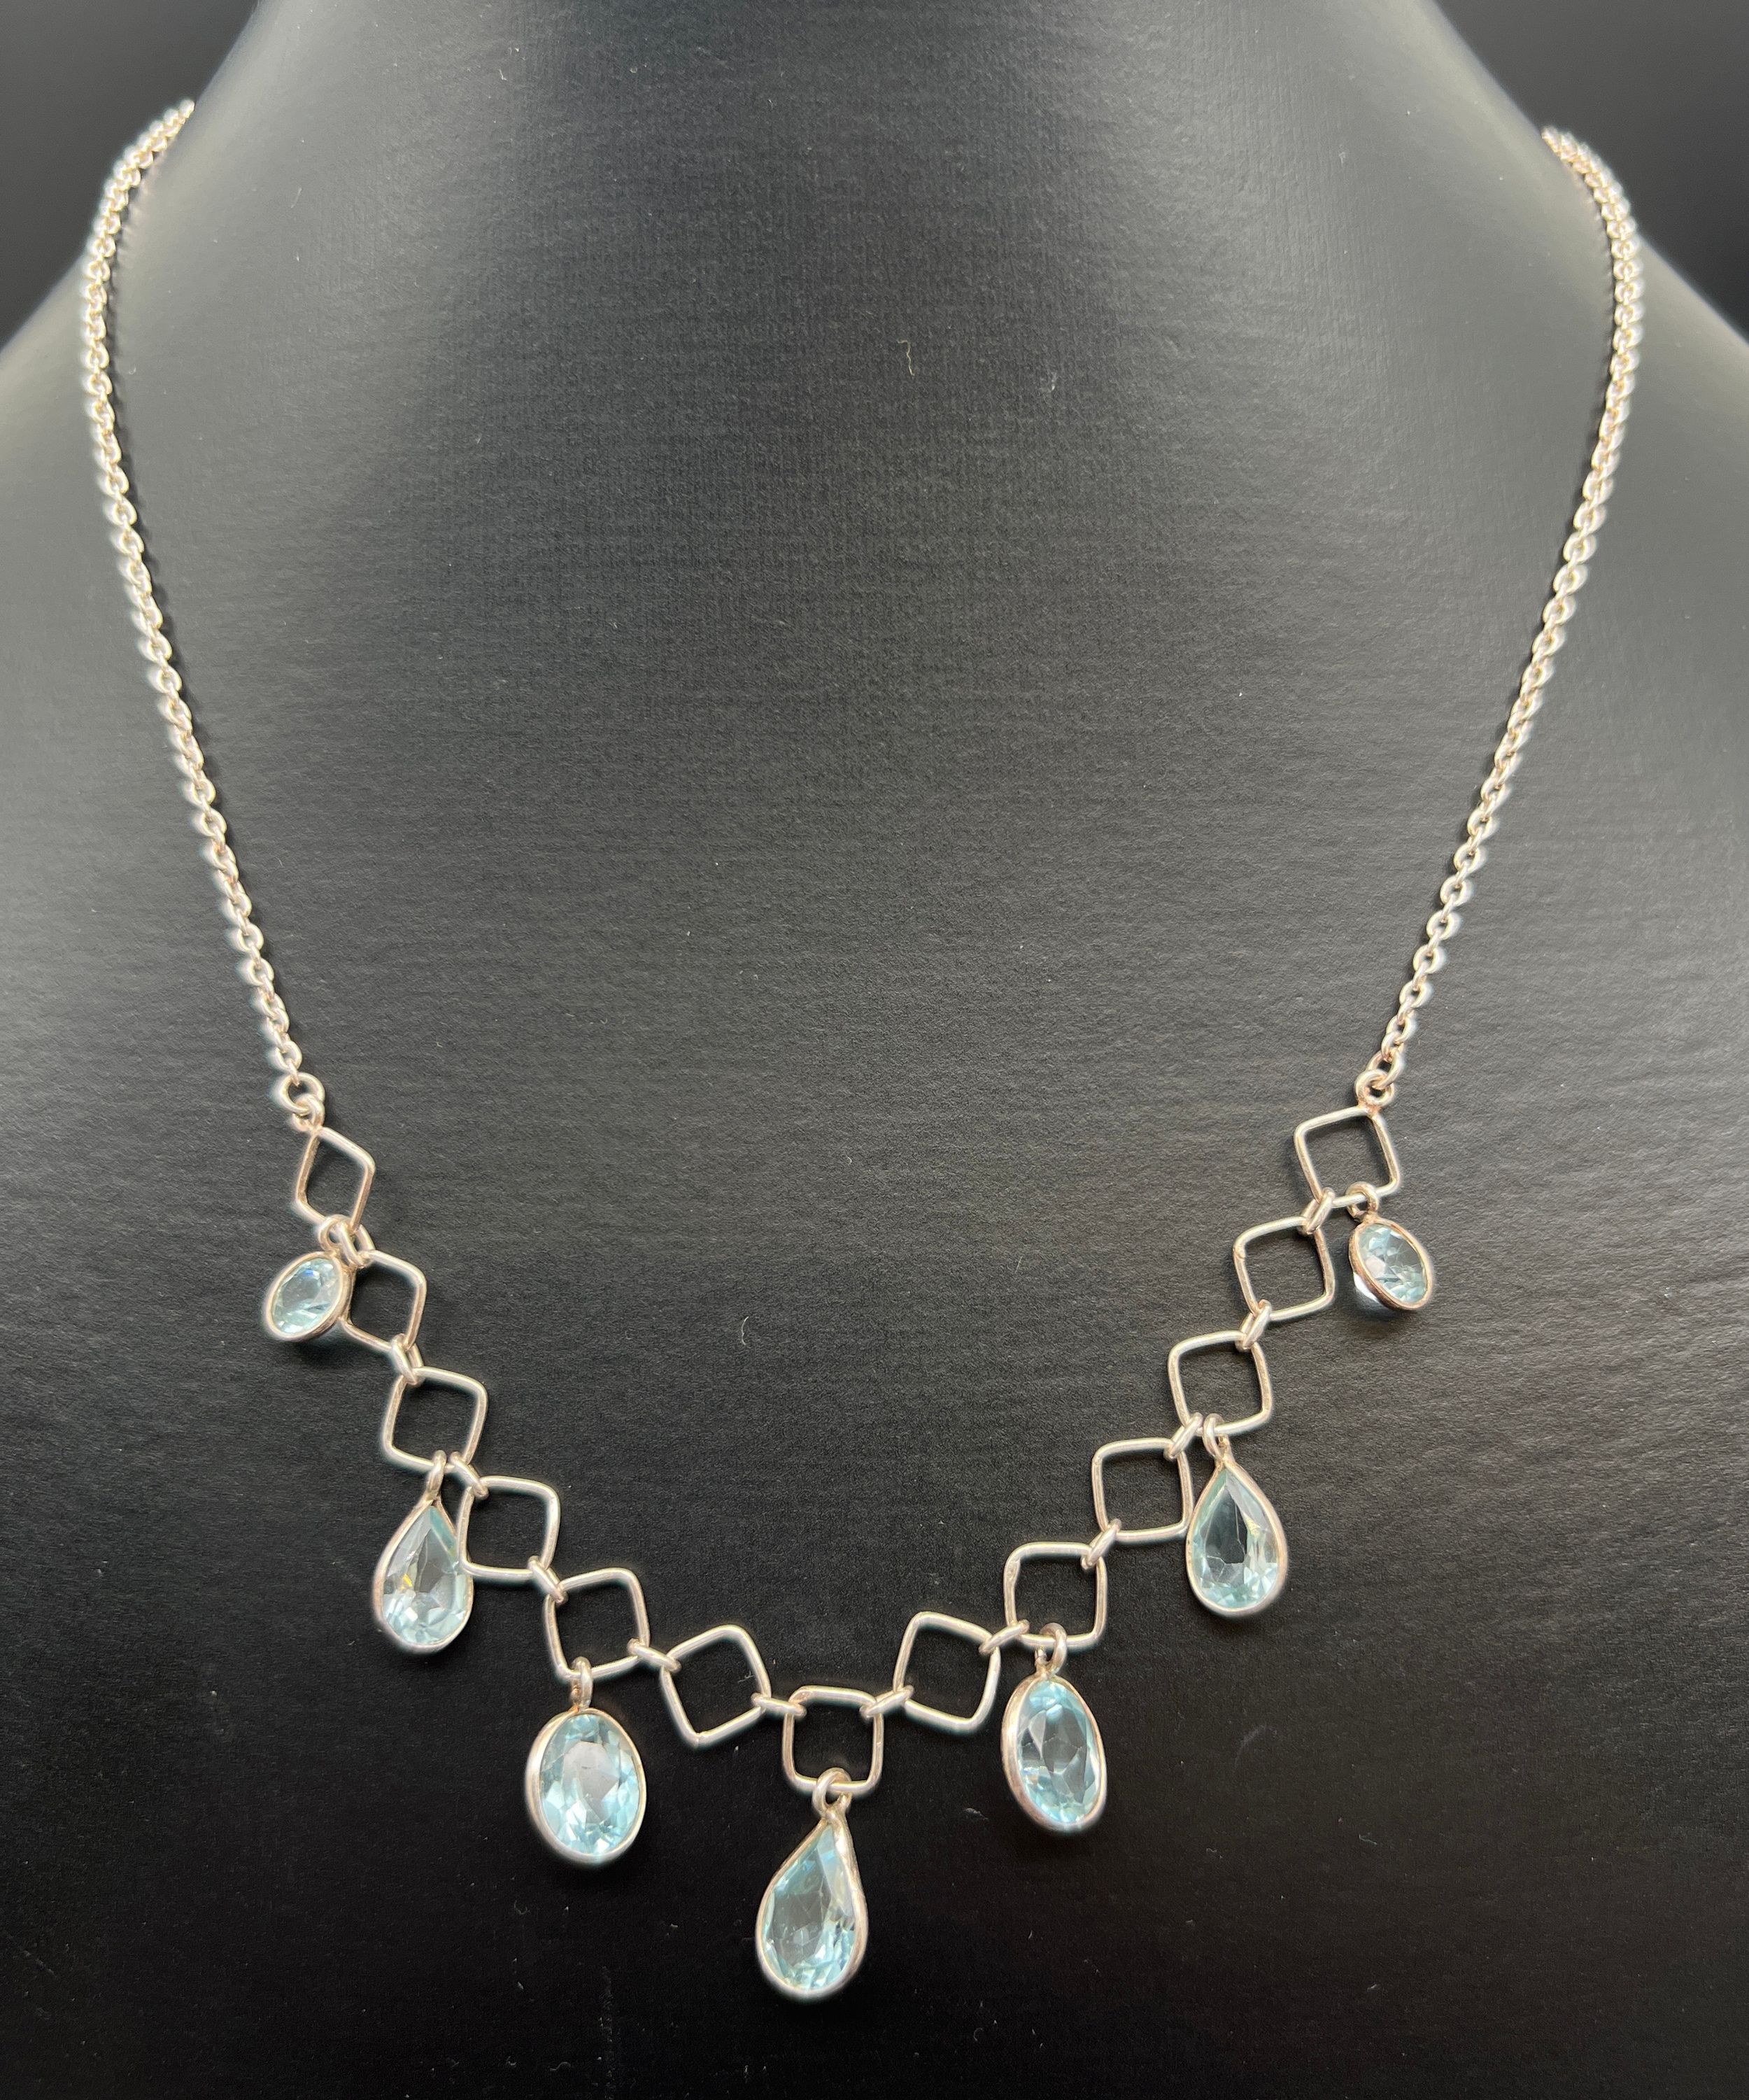 A modern design 18 inch fixed pendant silver necklace with round, oval and teardrop cut blue topaz